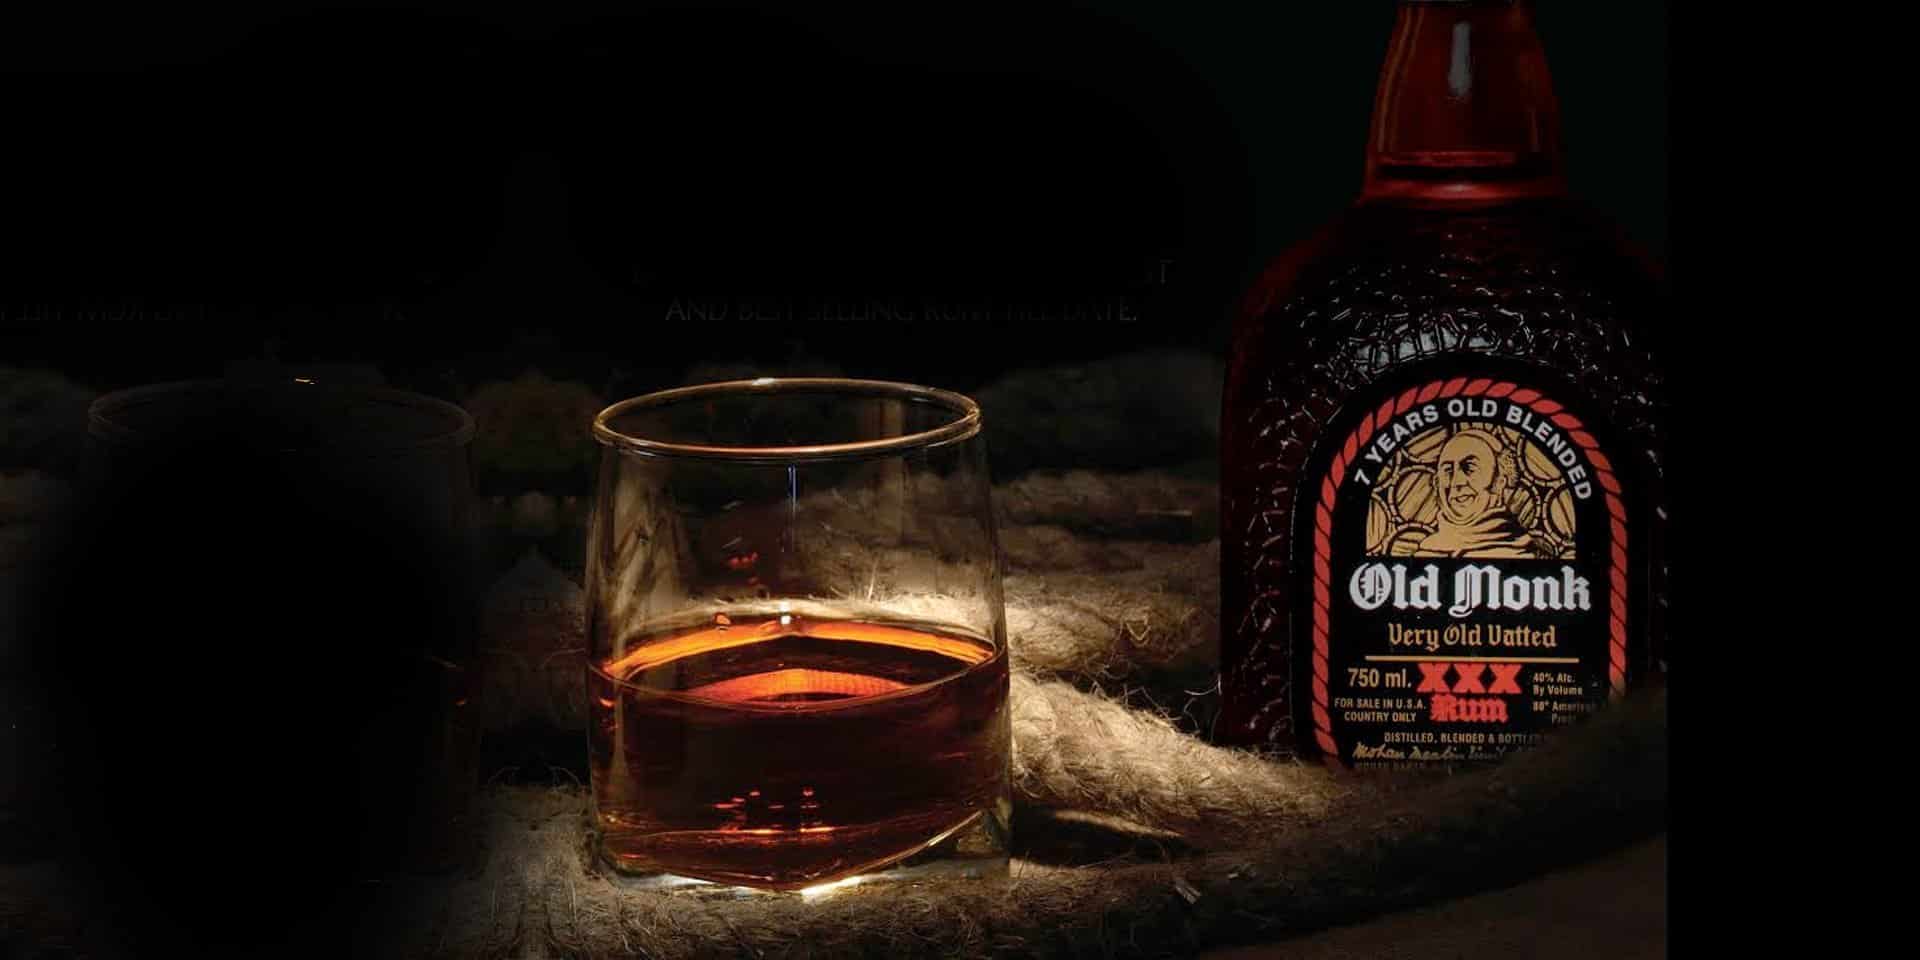 Ode to the old Monk - Tulleeho